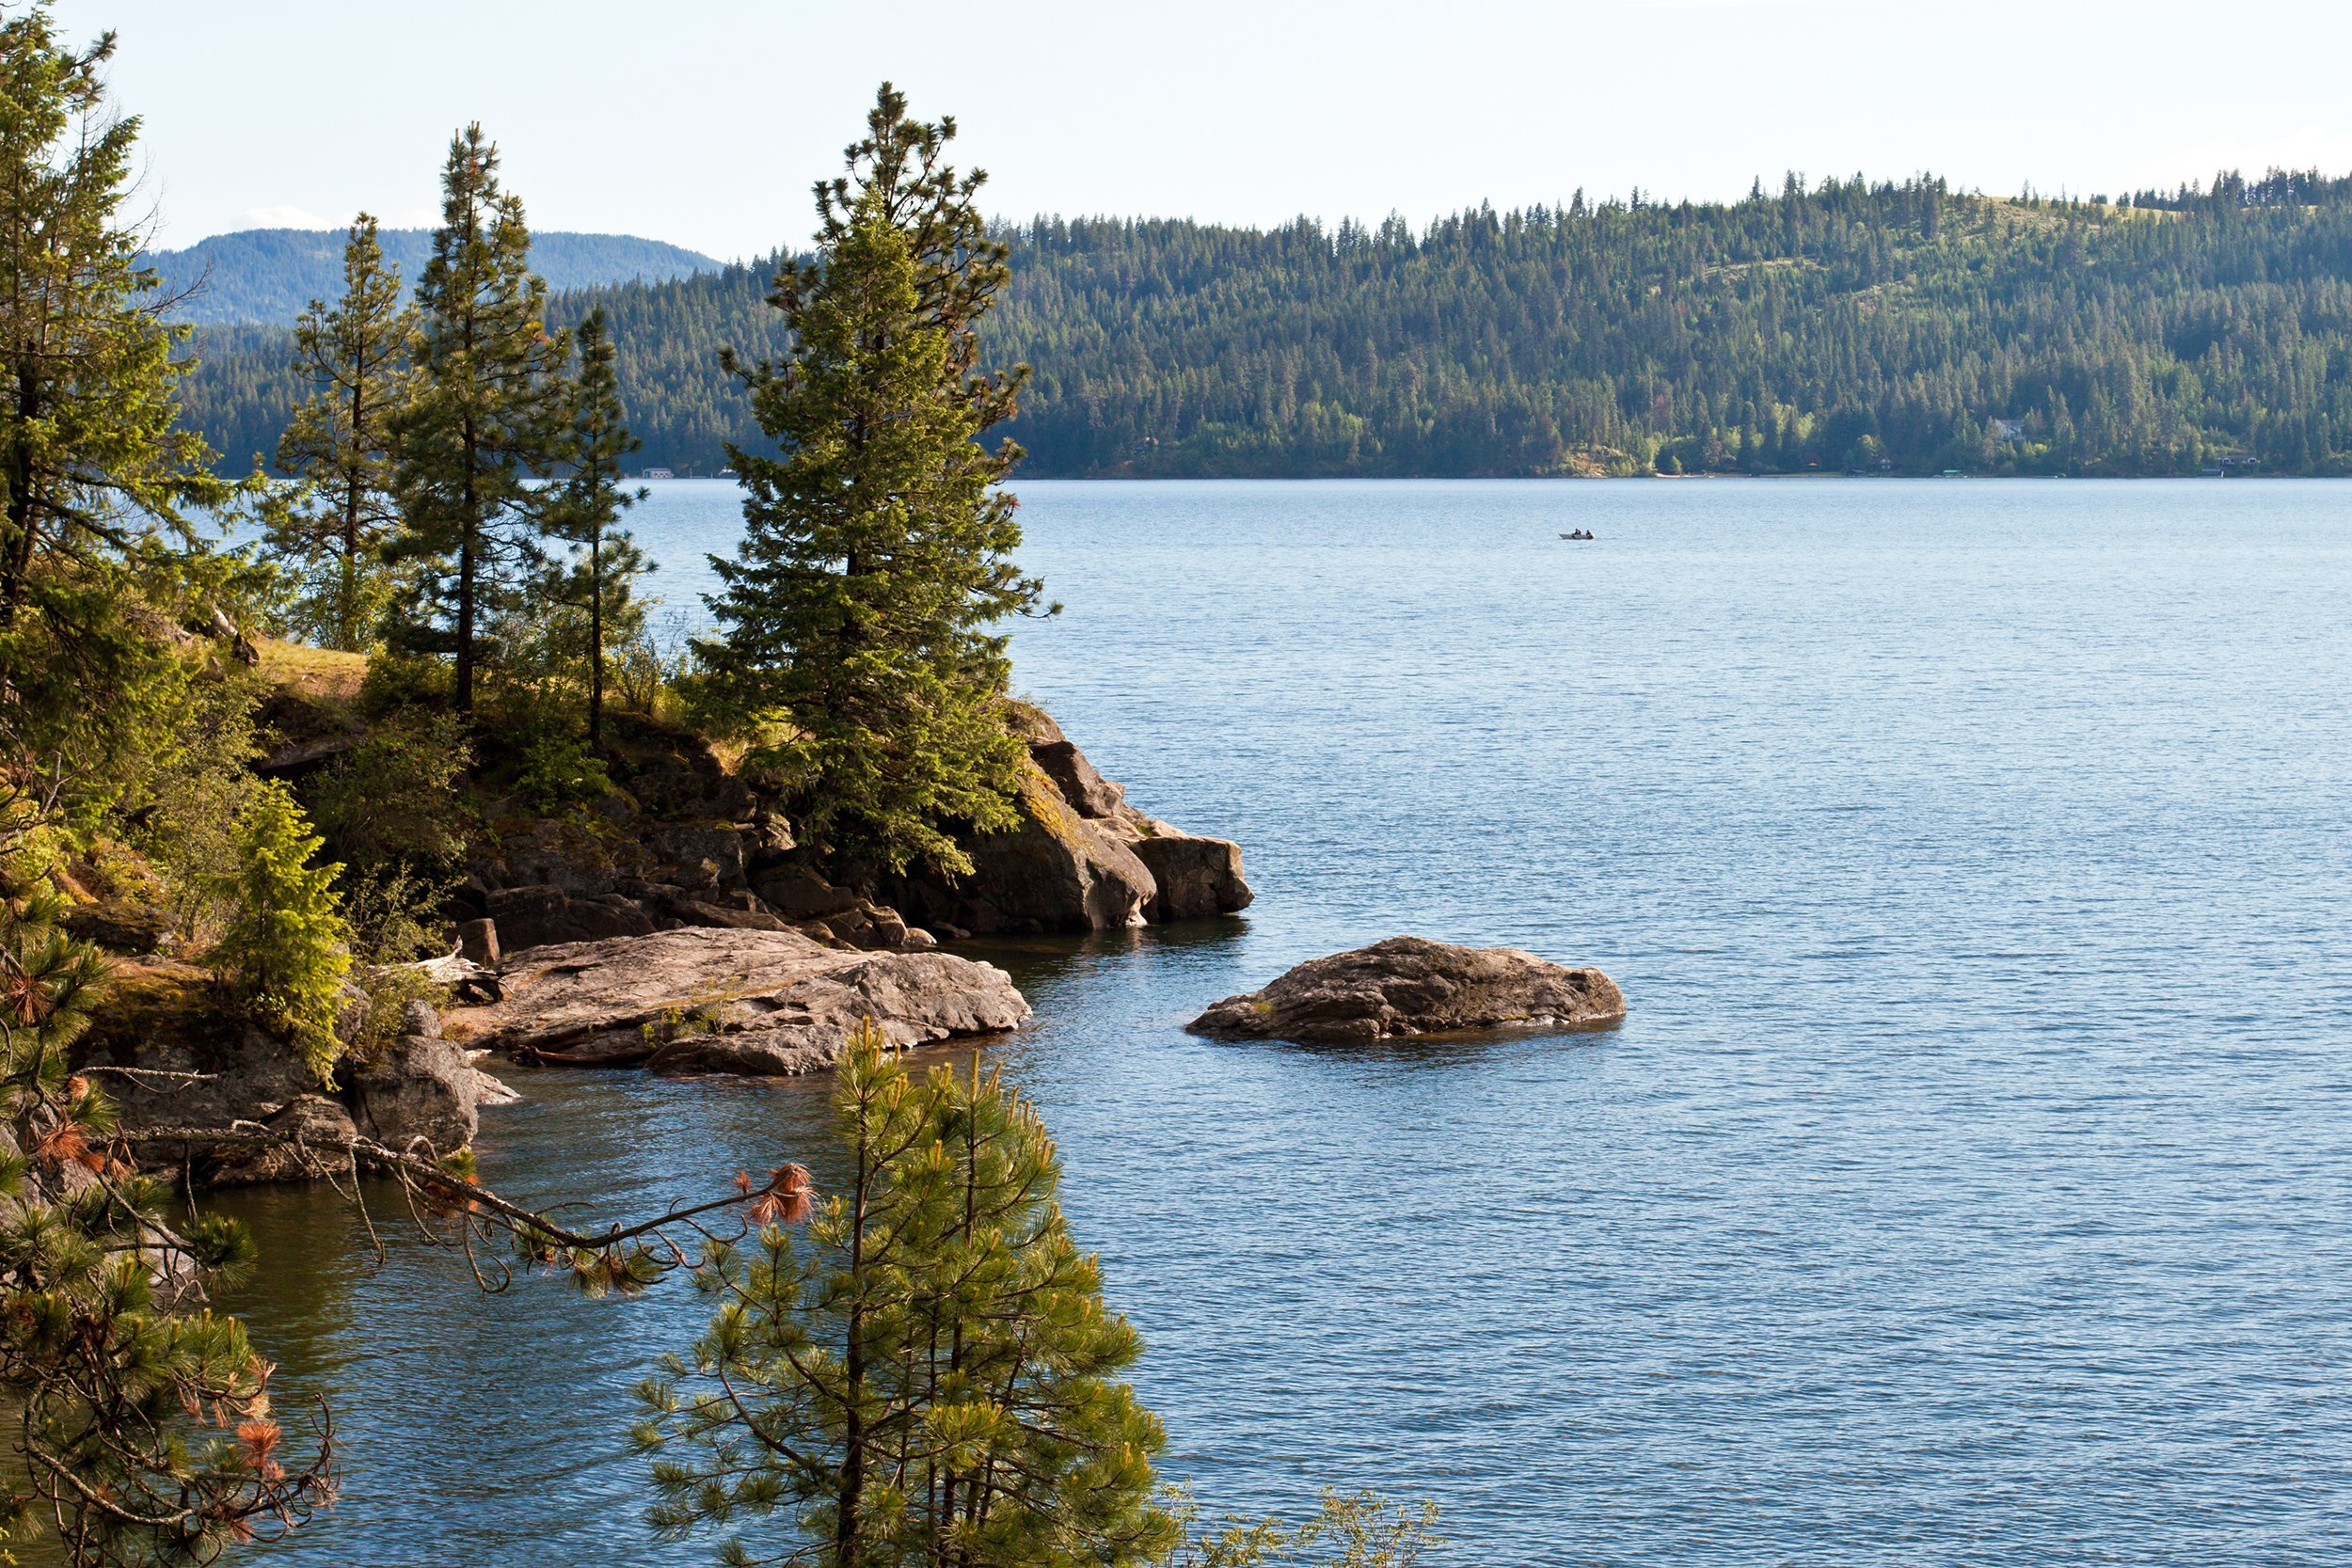 <p>This may not seem like an obvious recommendation, but Coeur d'Alene has more than 55 lakes, and that makes for a lot of beach. Activities on scenic Lake Coeur d'Alene include boat rentals and paddle boarding, and elsewhere there's hiking, golfing, and camping, as well as weekly concerts in city parks.</p>